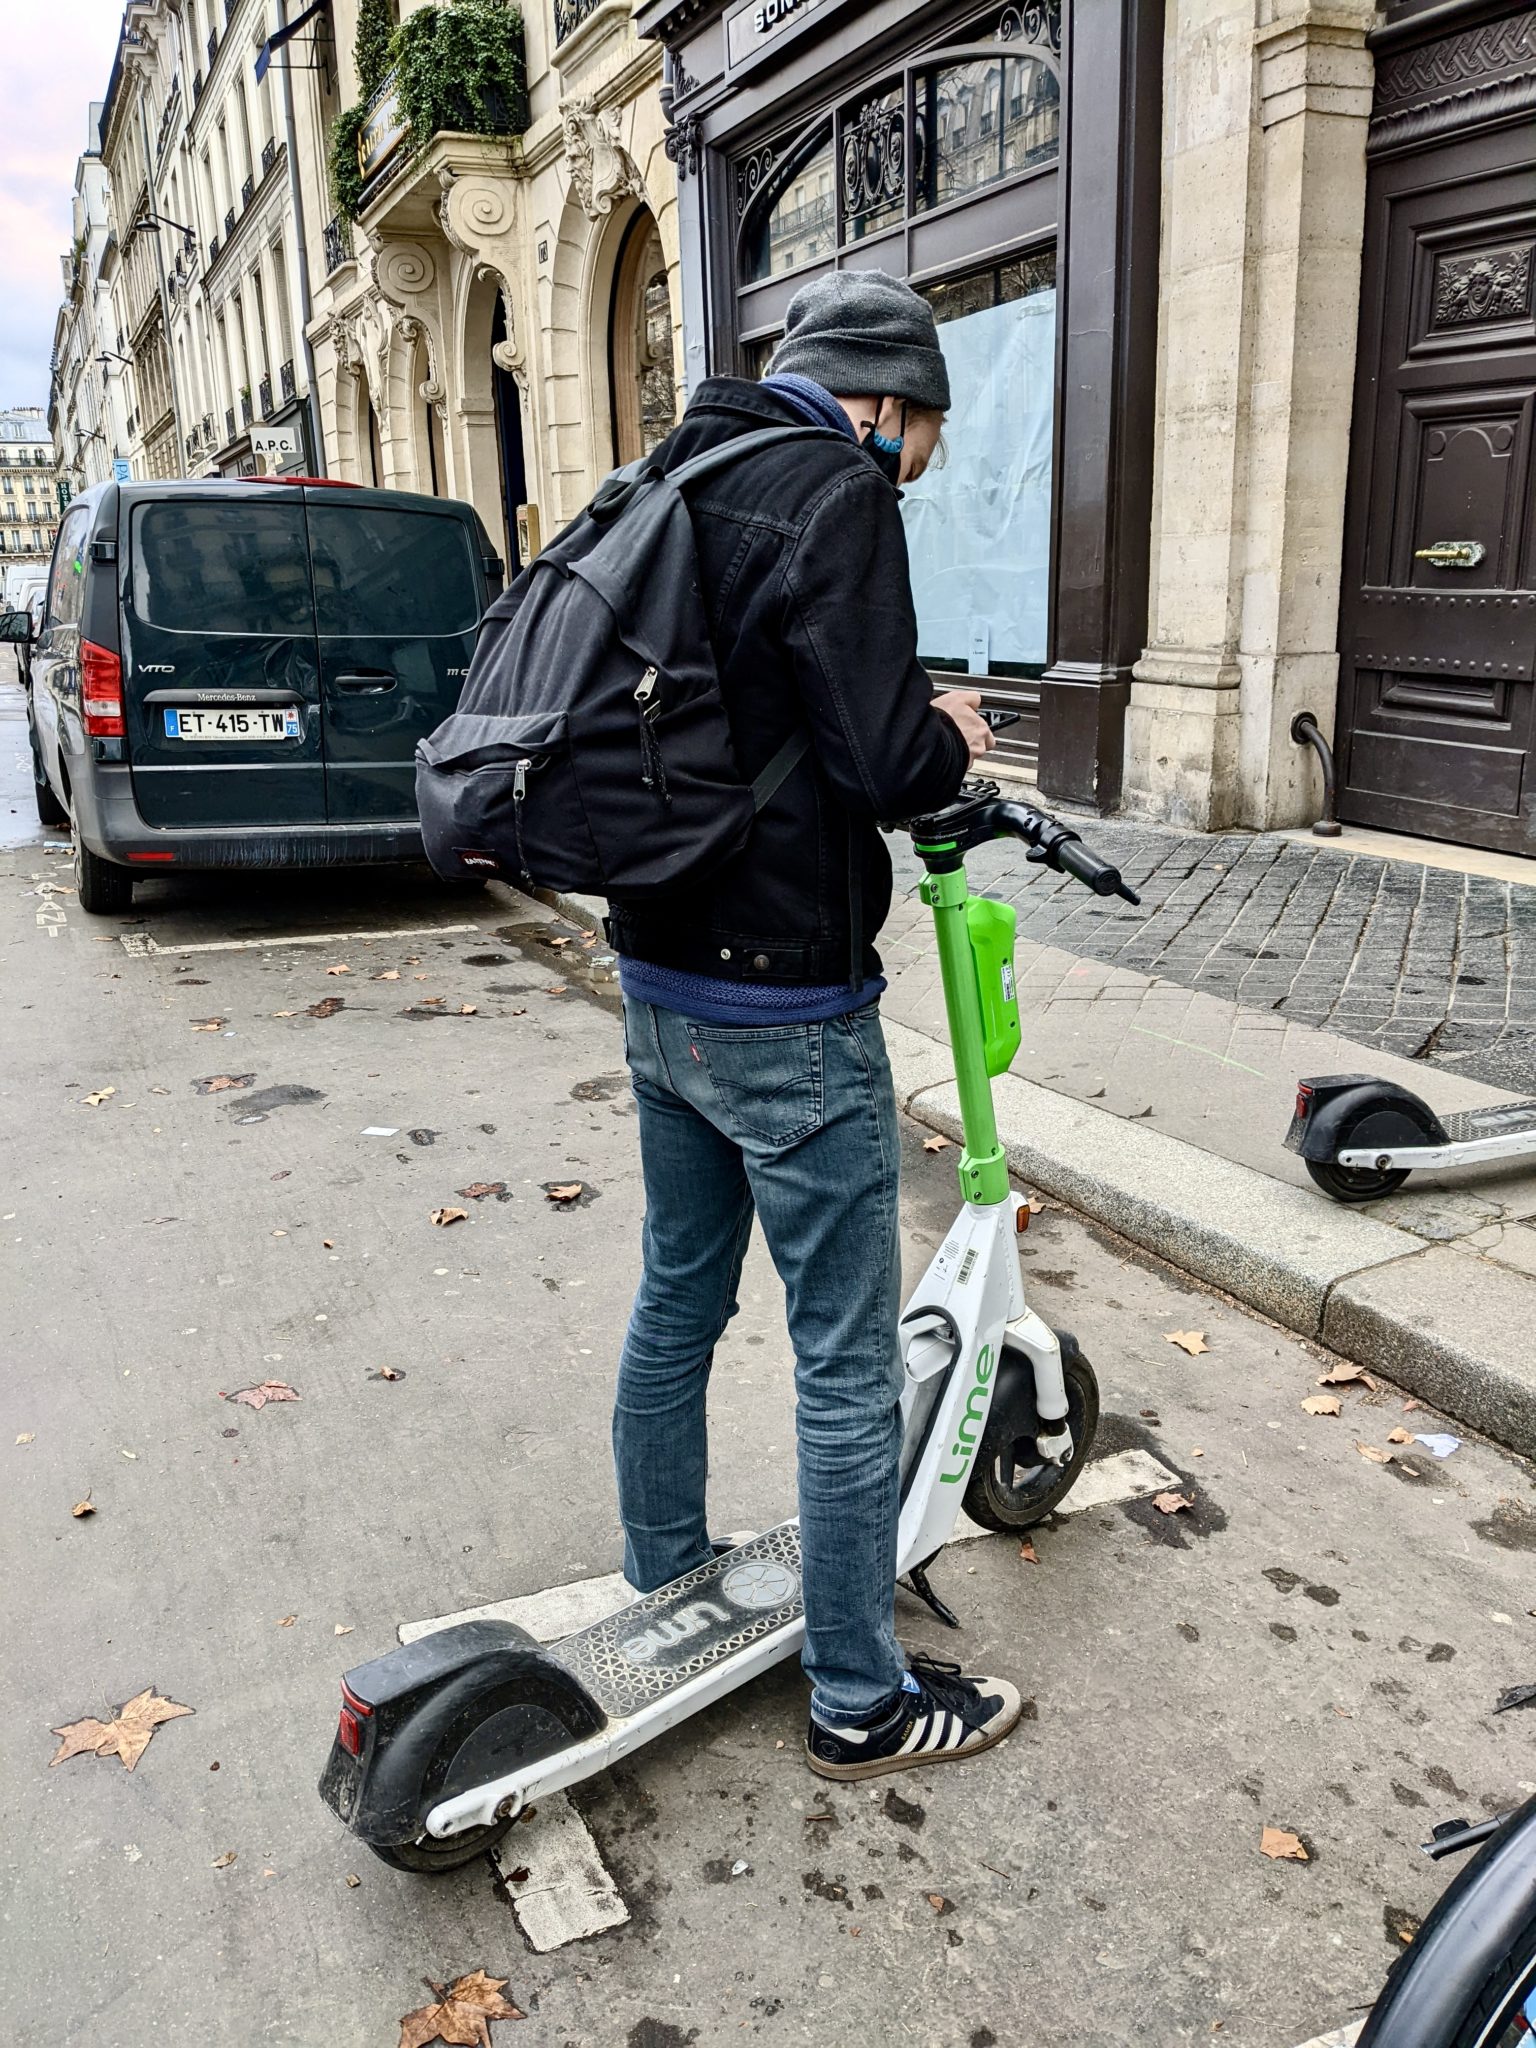 Is Paris Expensive? Travel by scooter